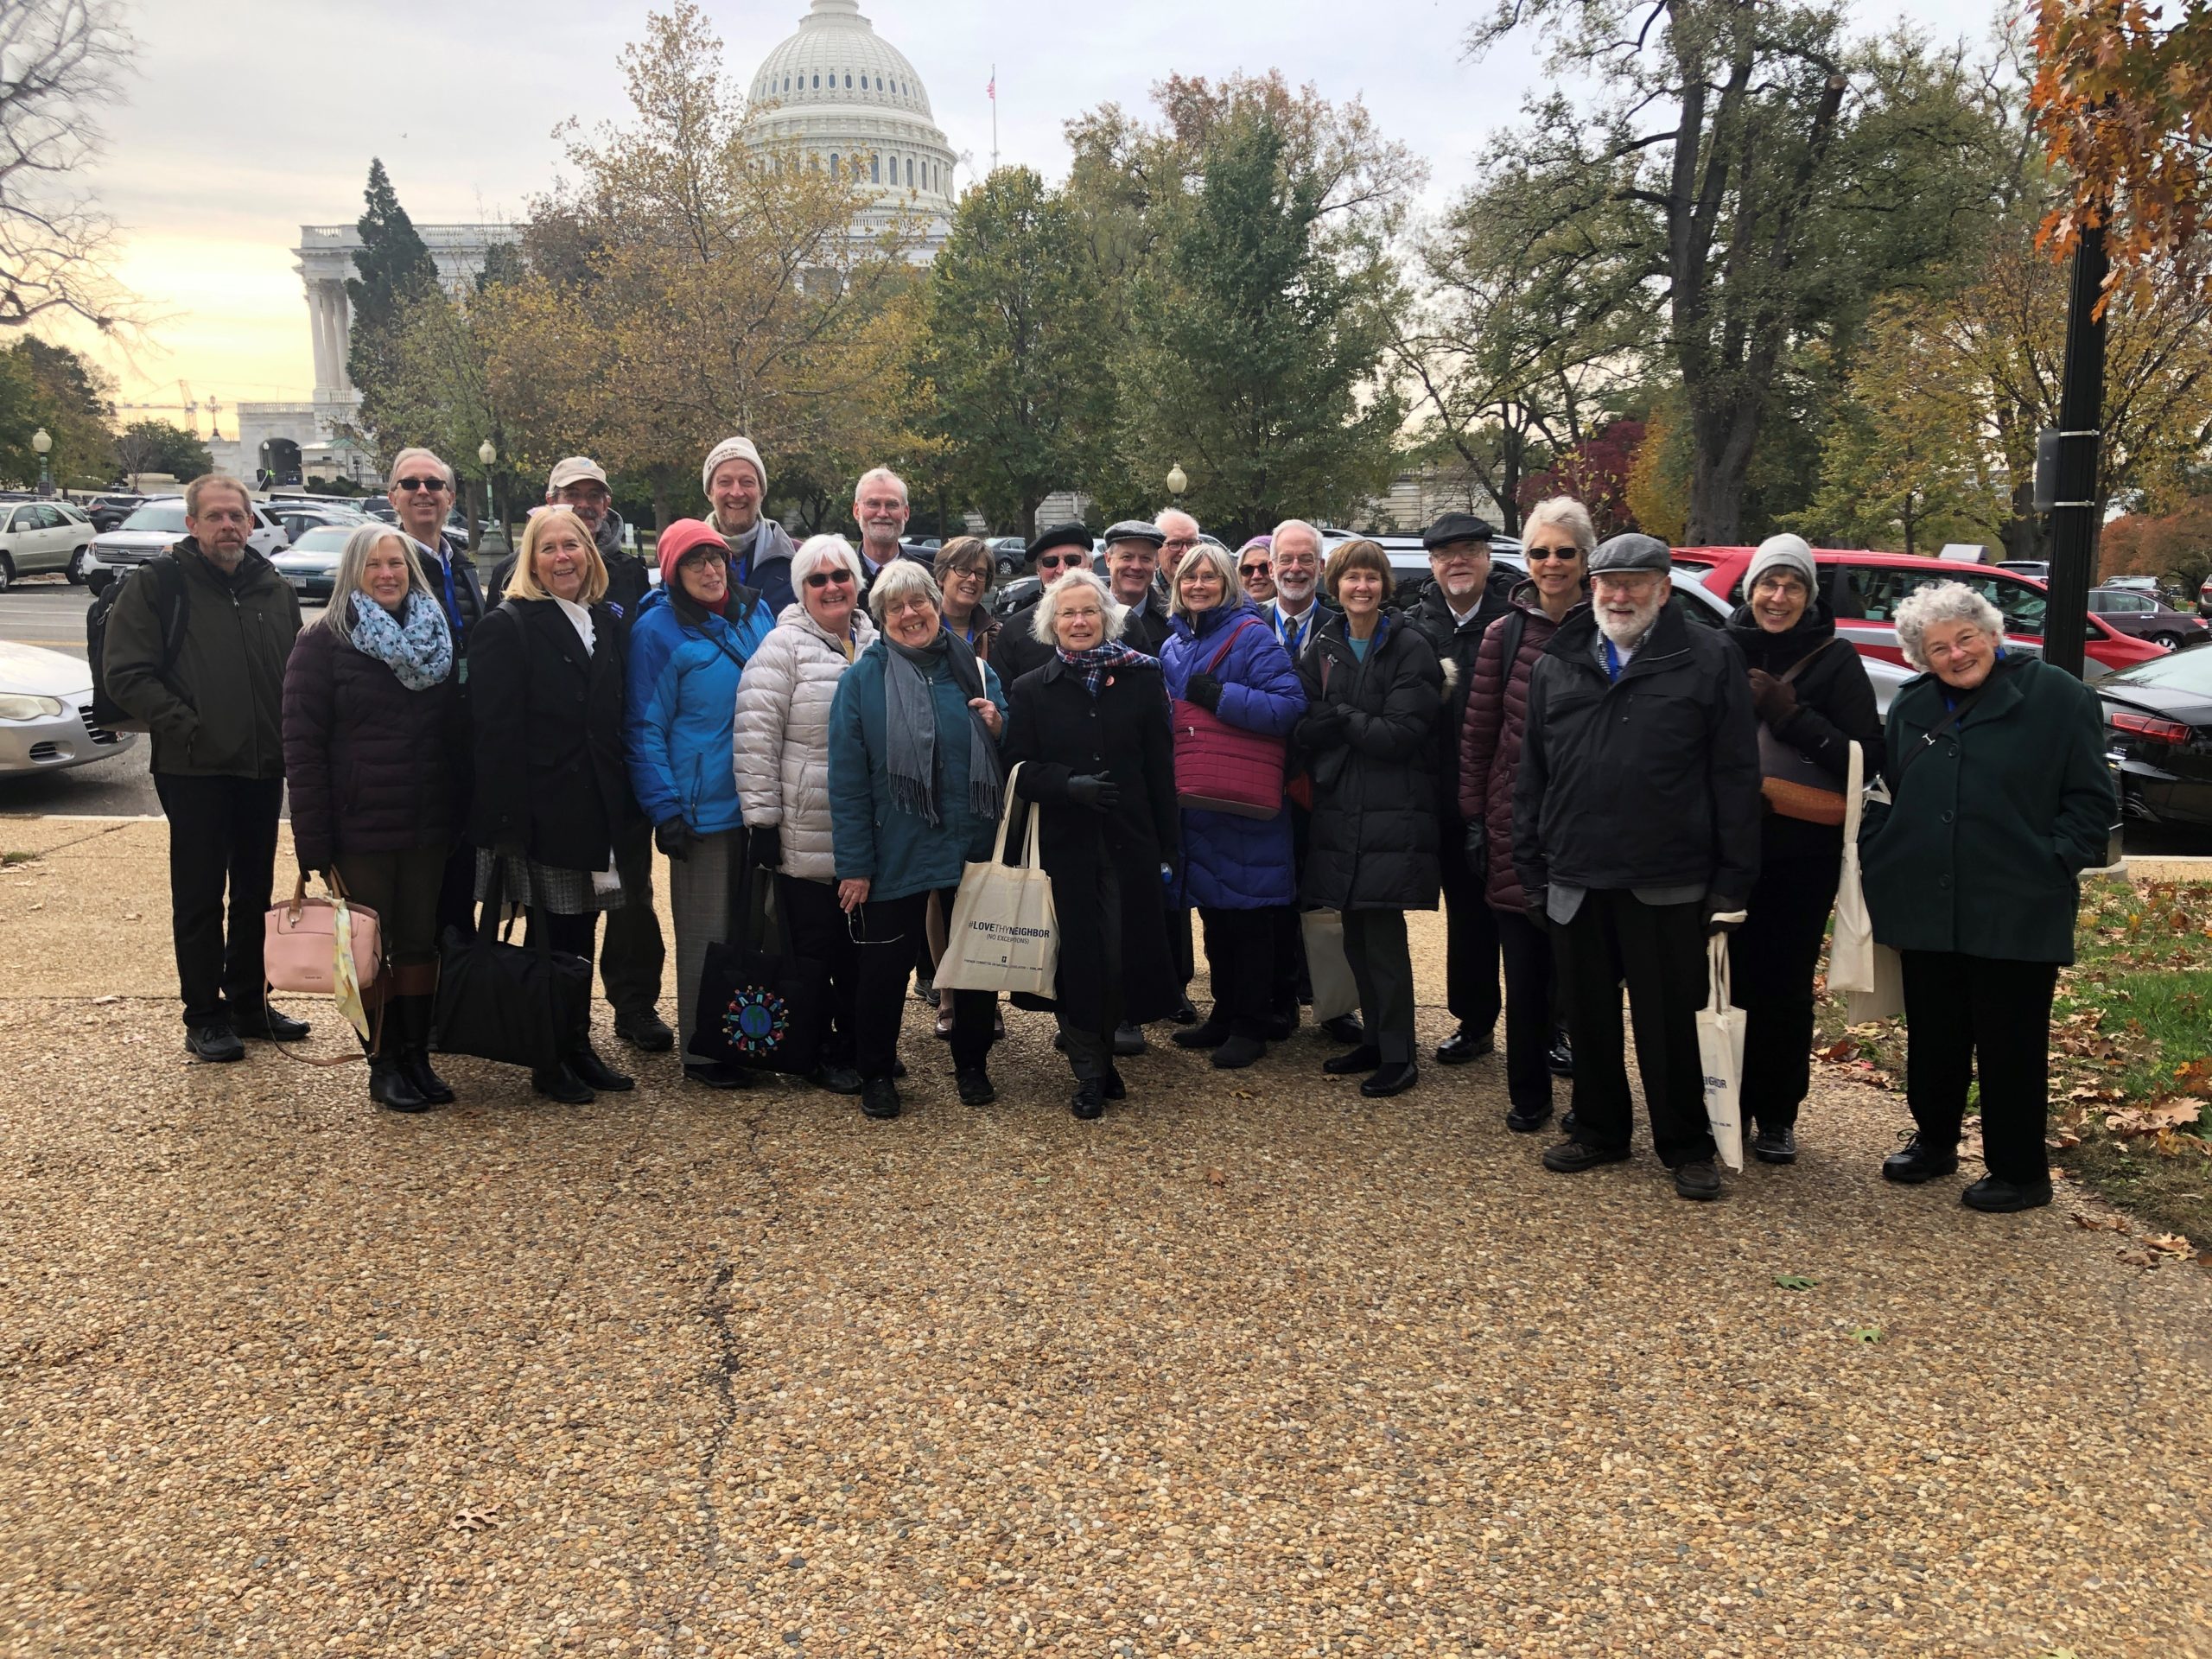 Quakers Engage with Their Congressional Representatives in Washington DC